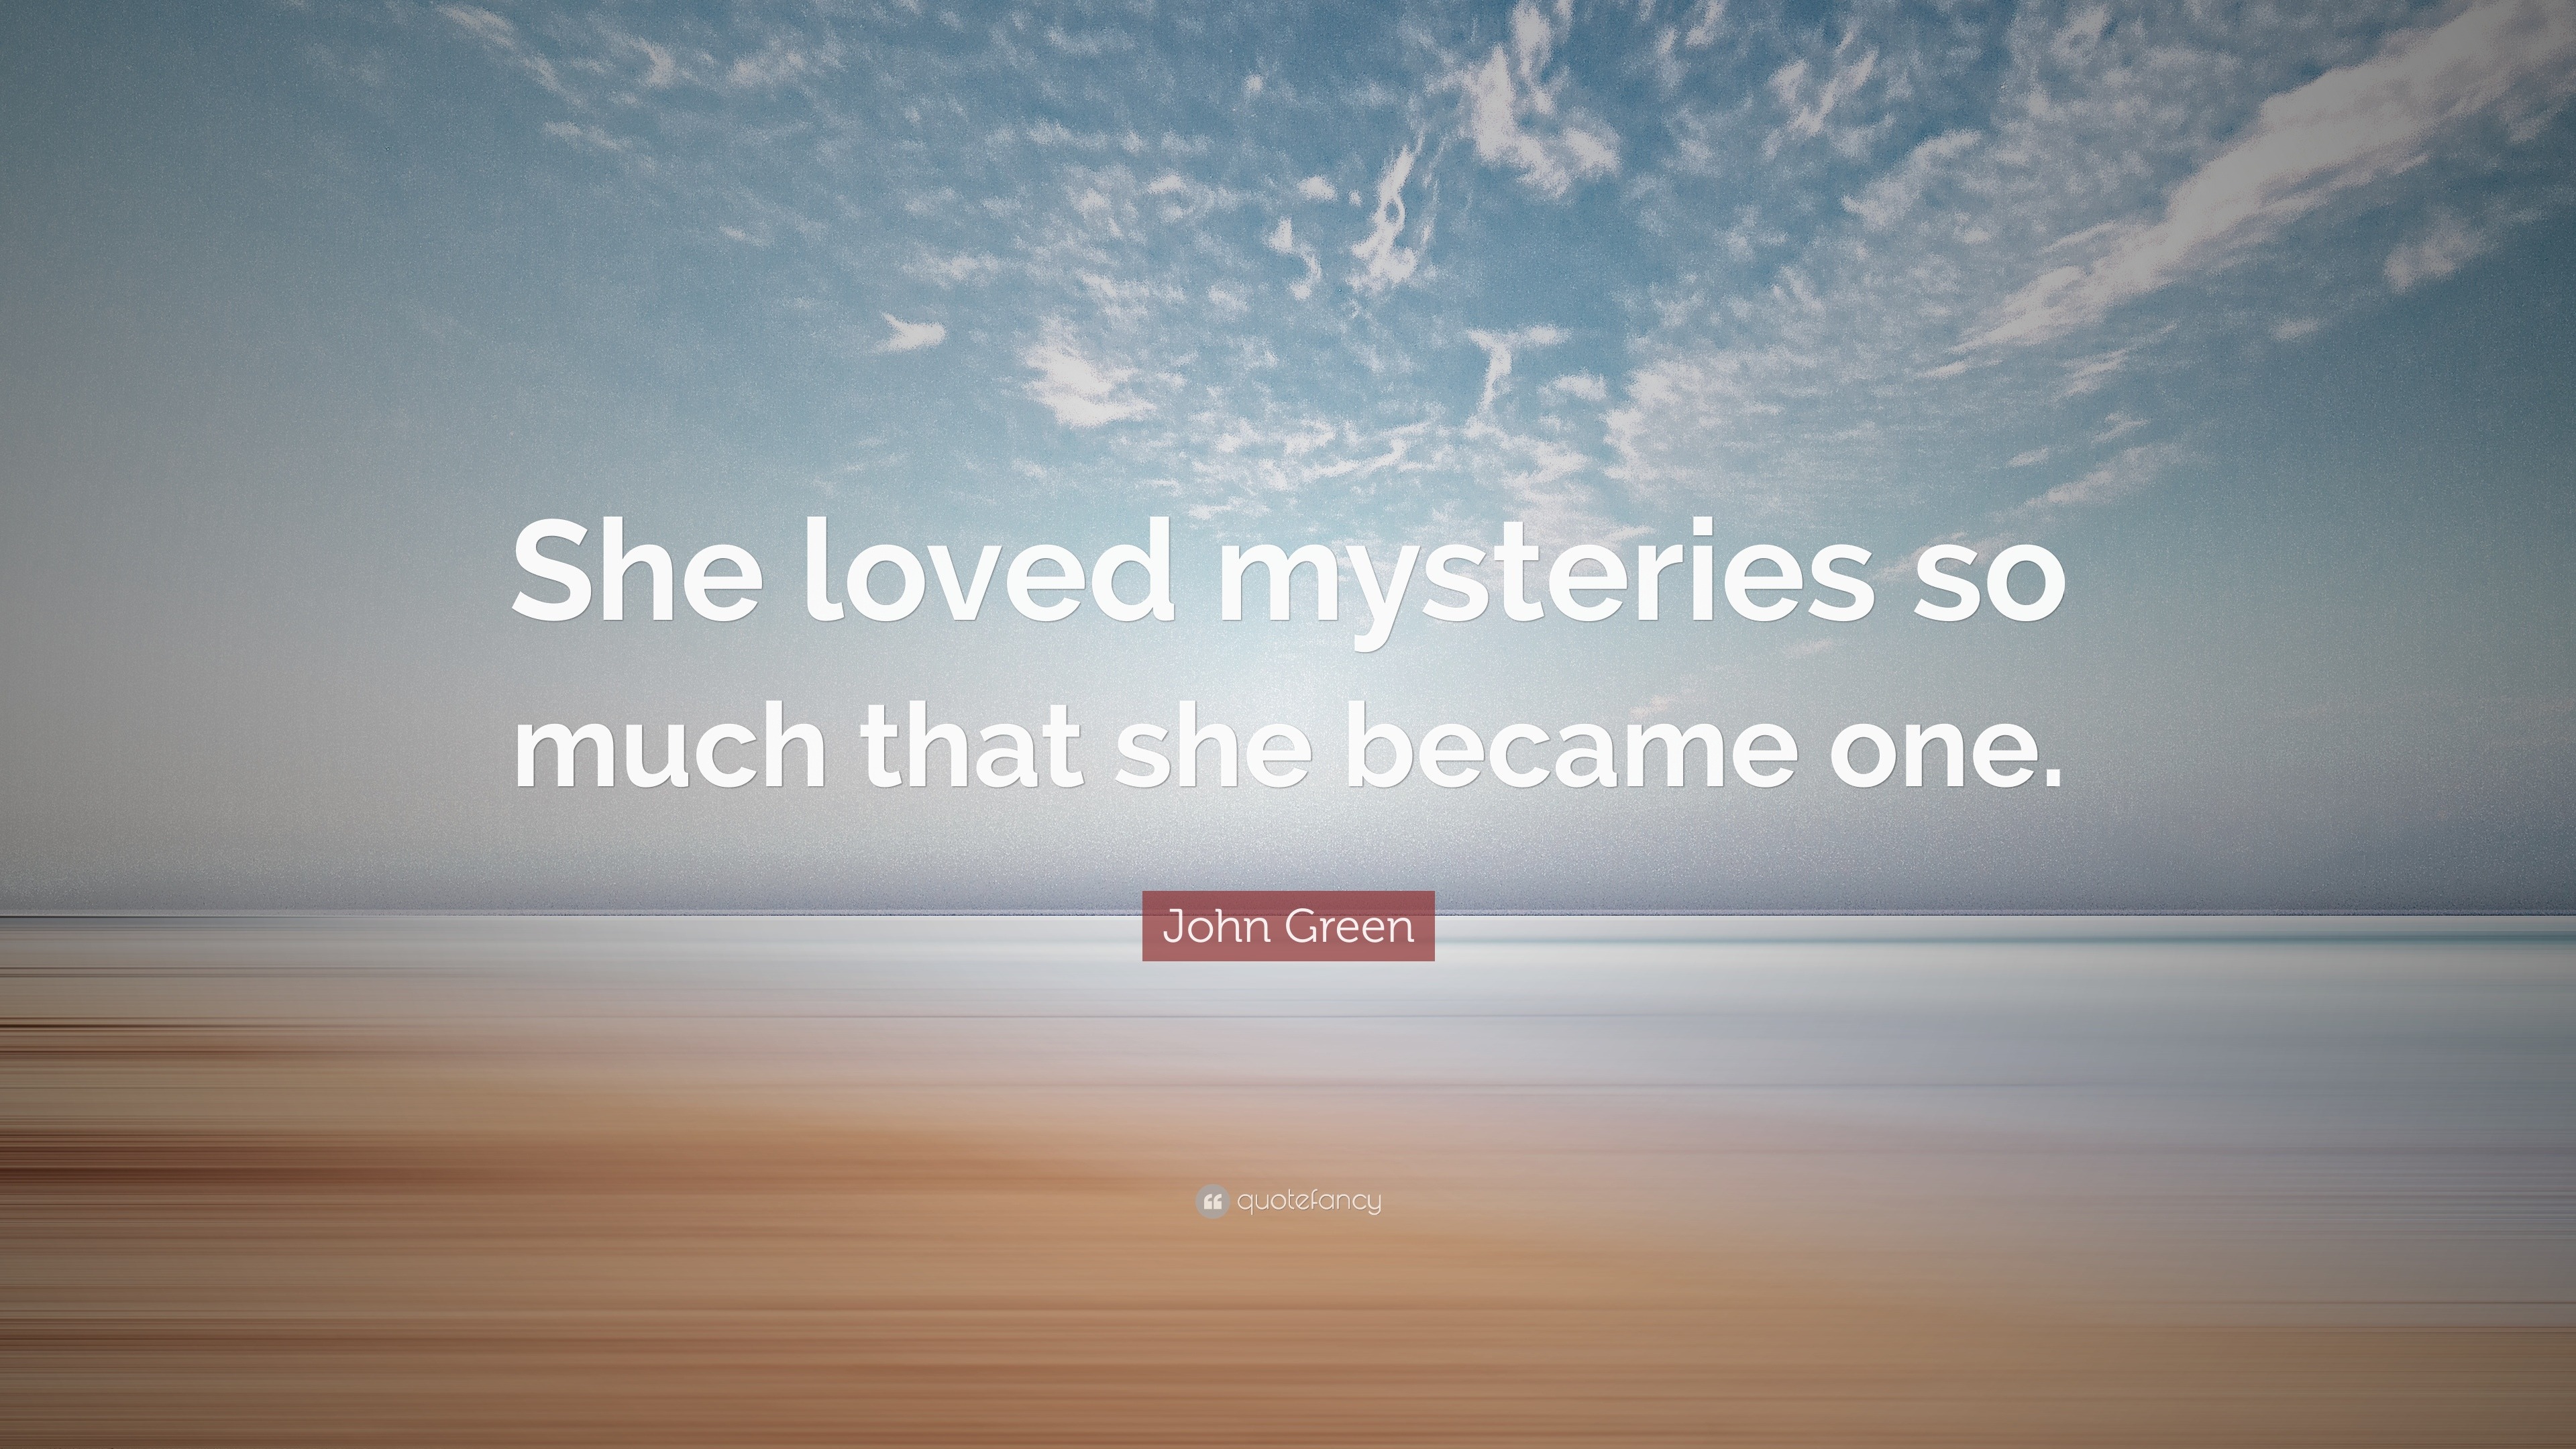 John Green Quote: “She loved mysteries so much that she became one.”